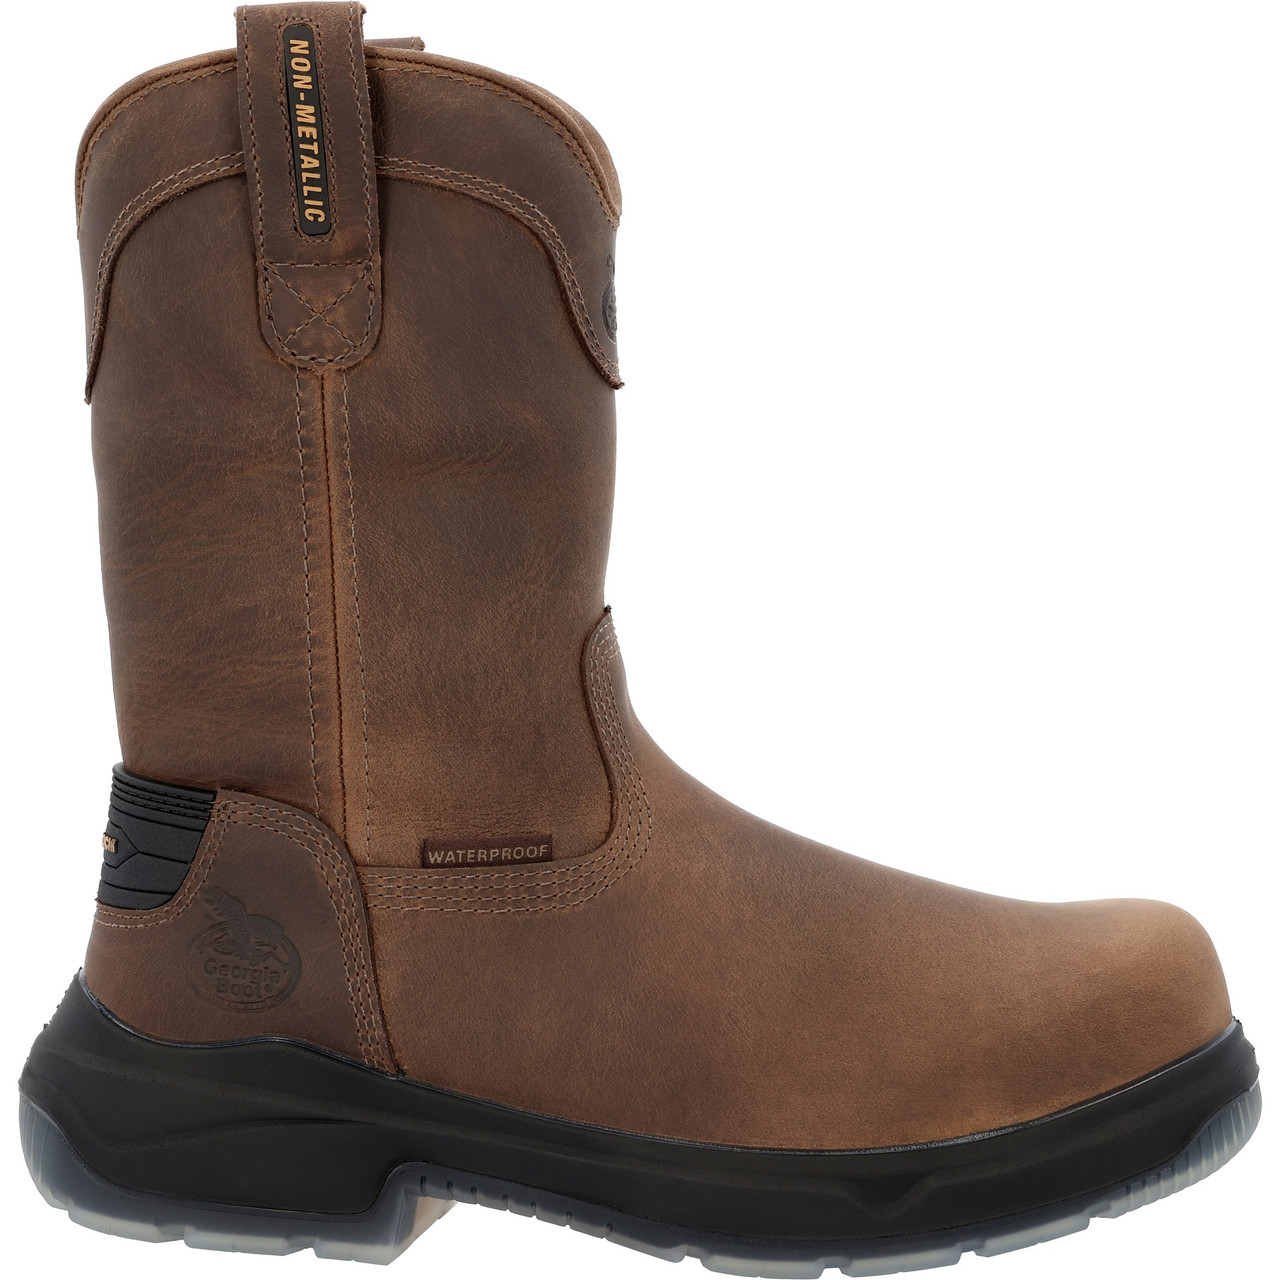 GEORGIA FLXPOINT ULTRA COMPOSITE TOE WATERPROOF WELLINGTON PULL-ON BOOTS GB00555